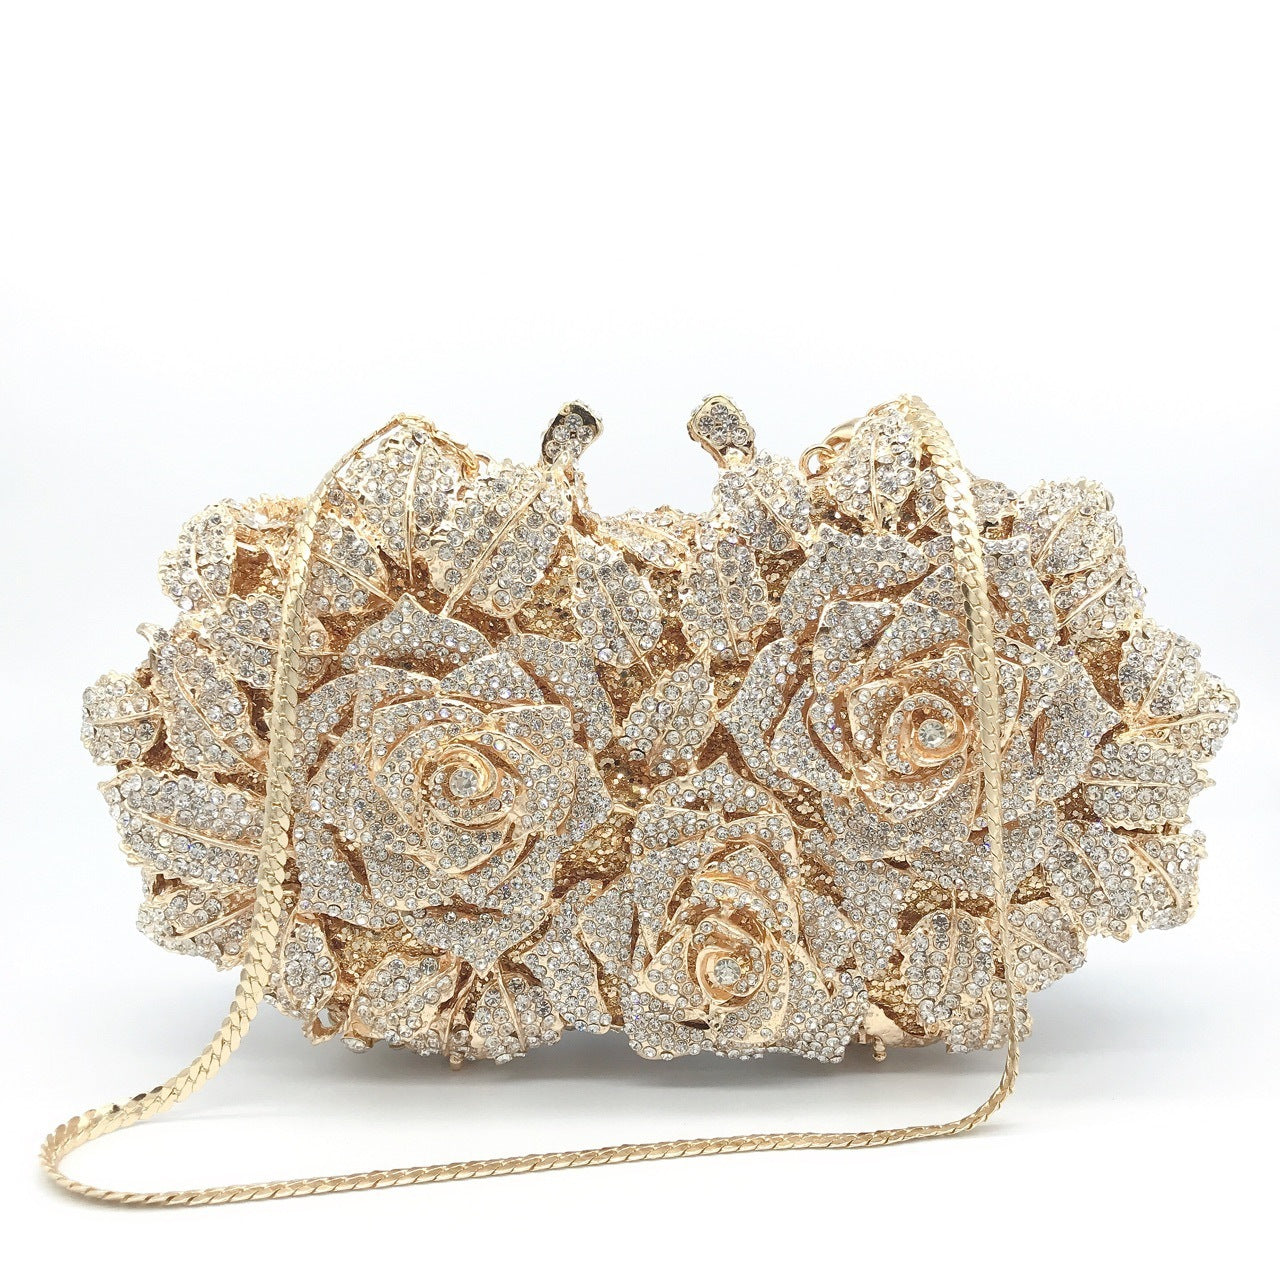 Glamorous-rose-patterned-handbag-for-special-occasions